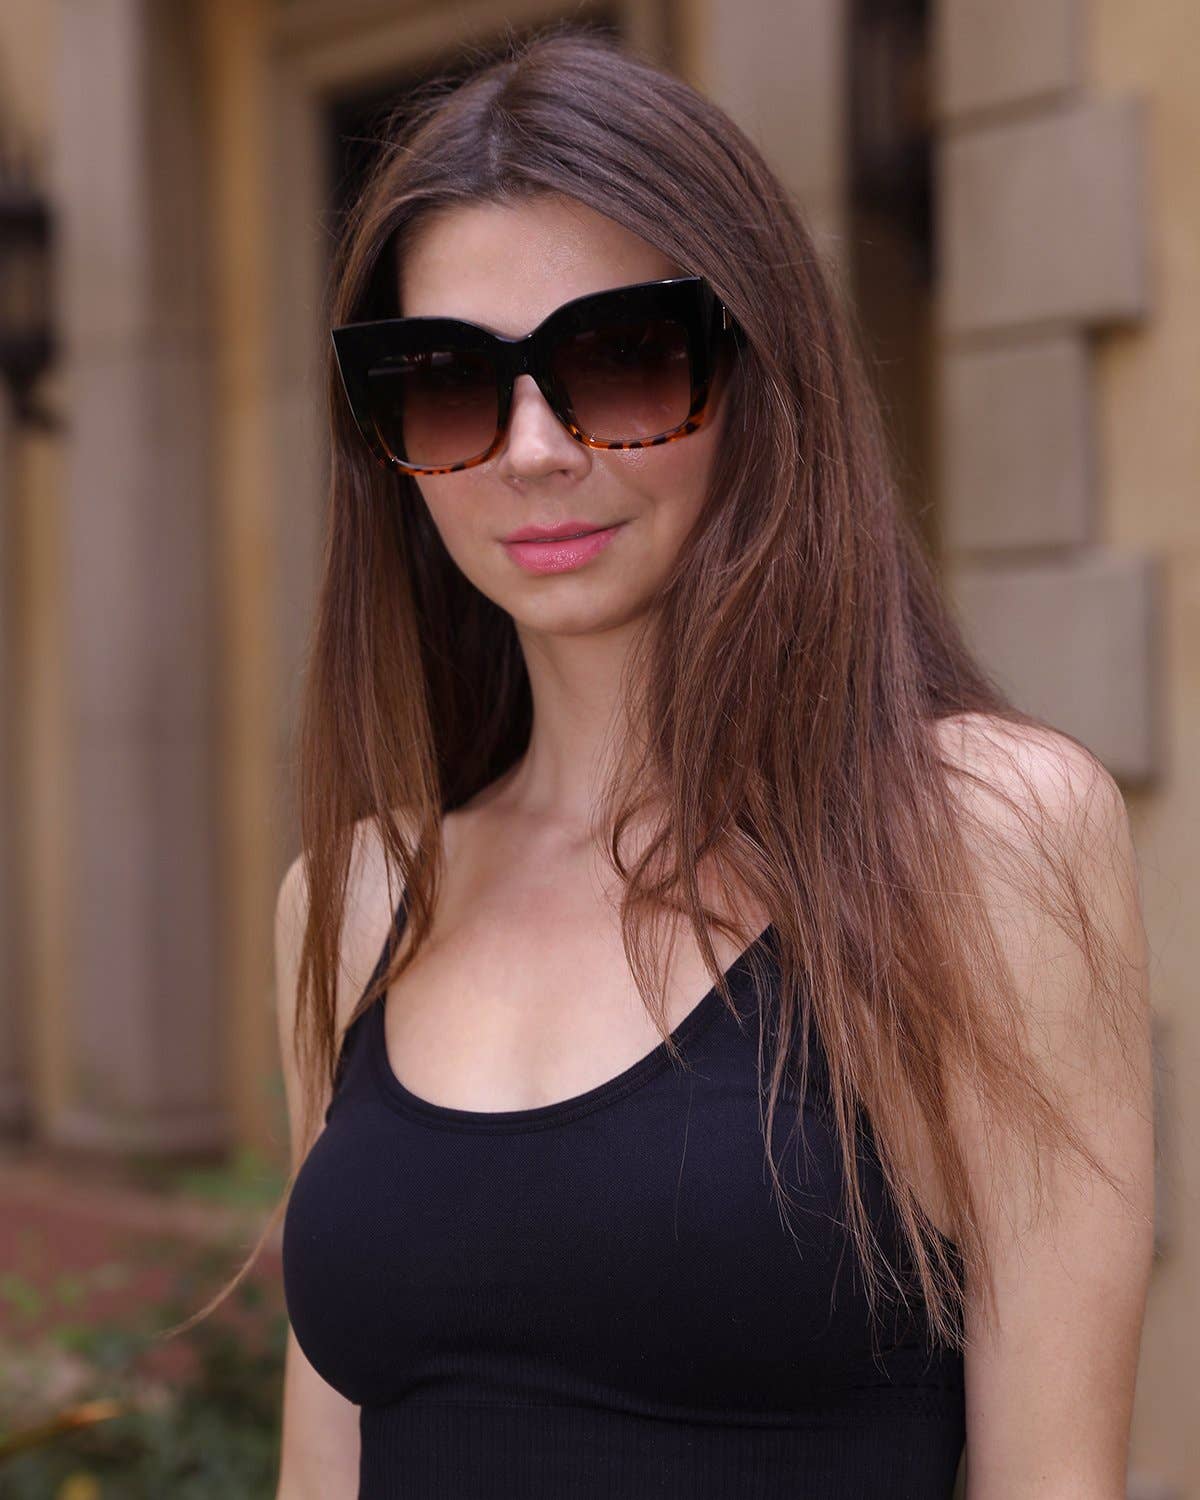 Chic Brown Oversized Sunglasses - Summer Style Essential"